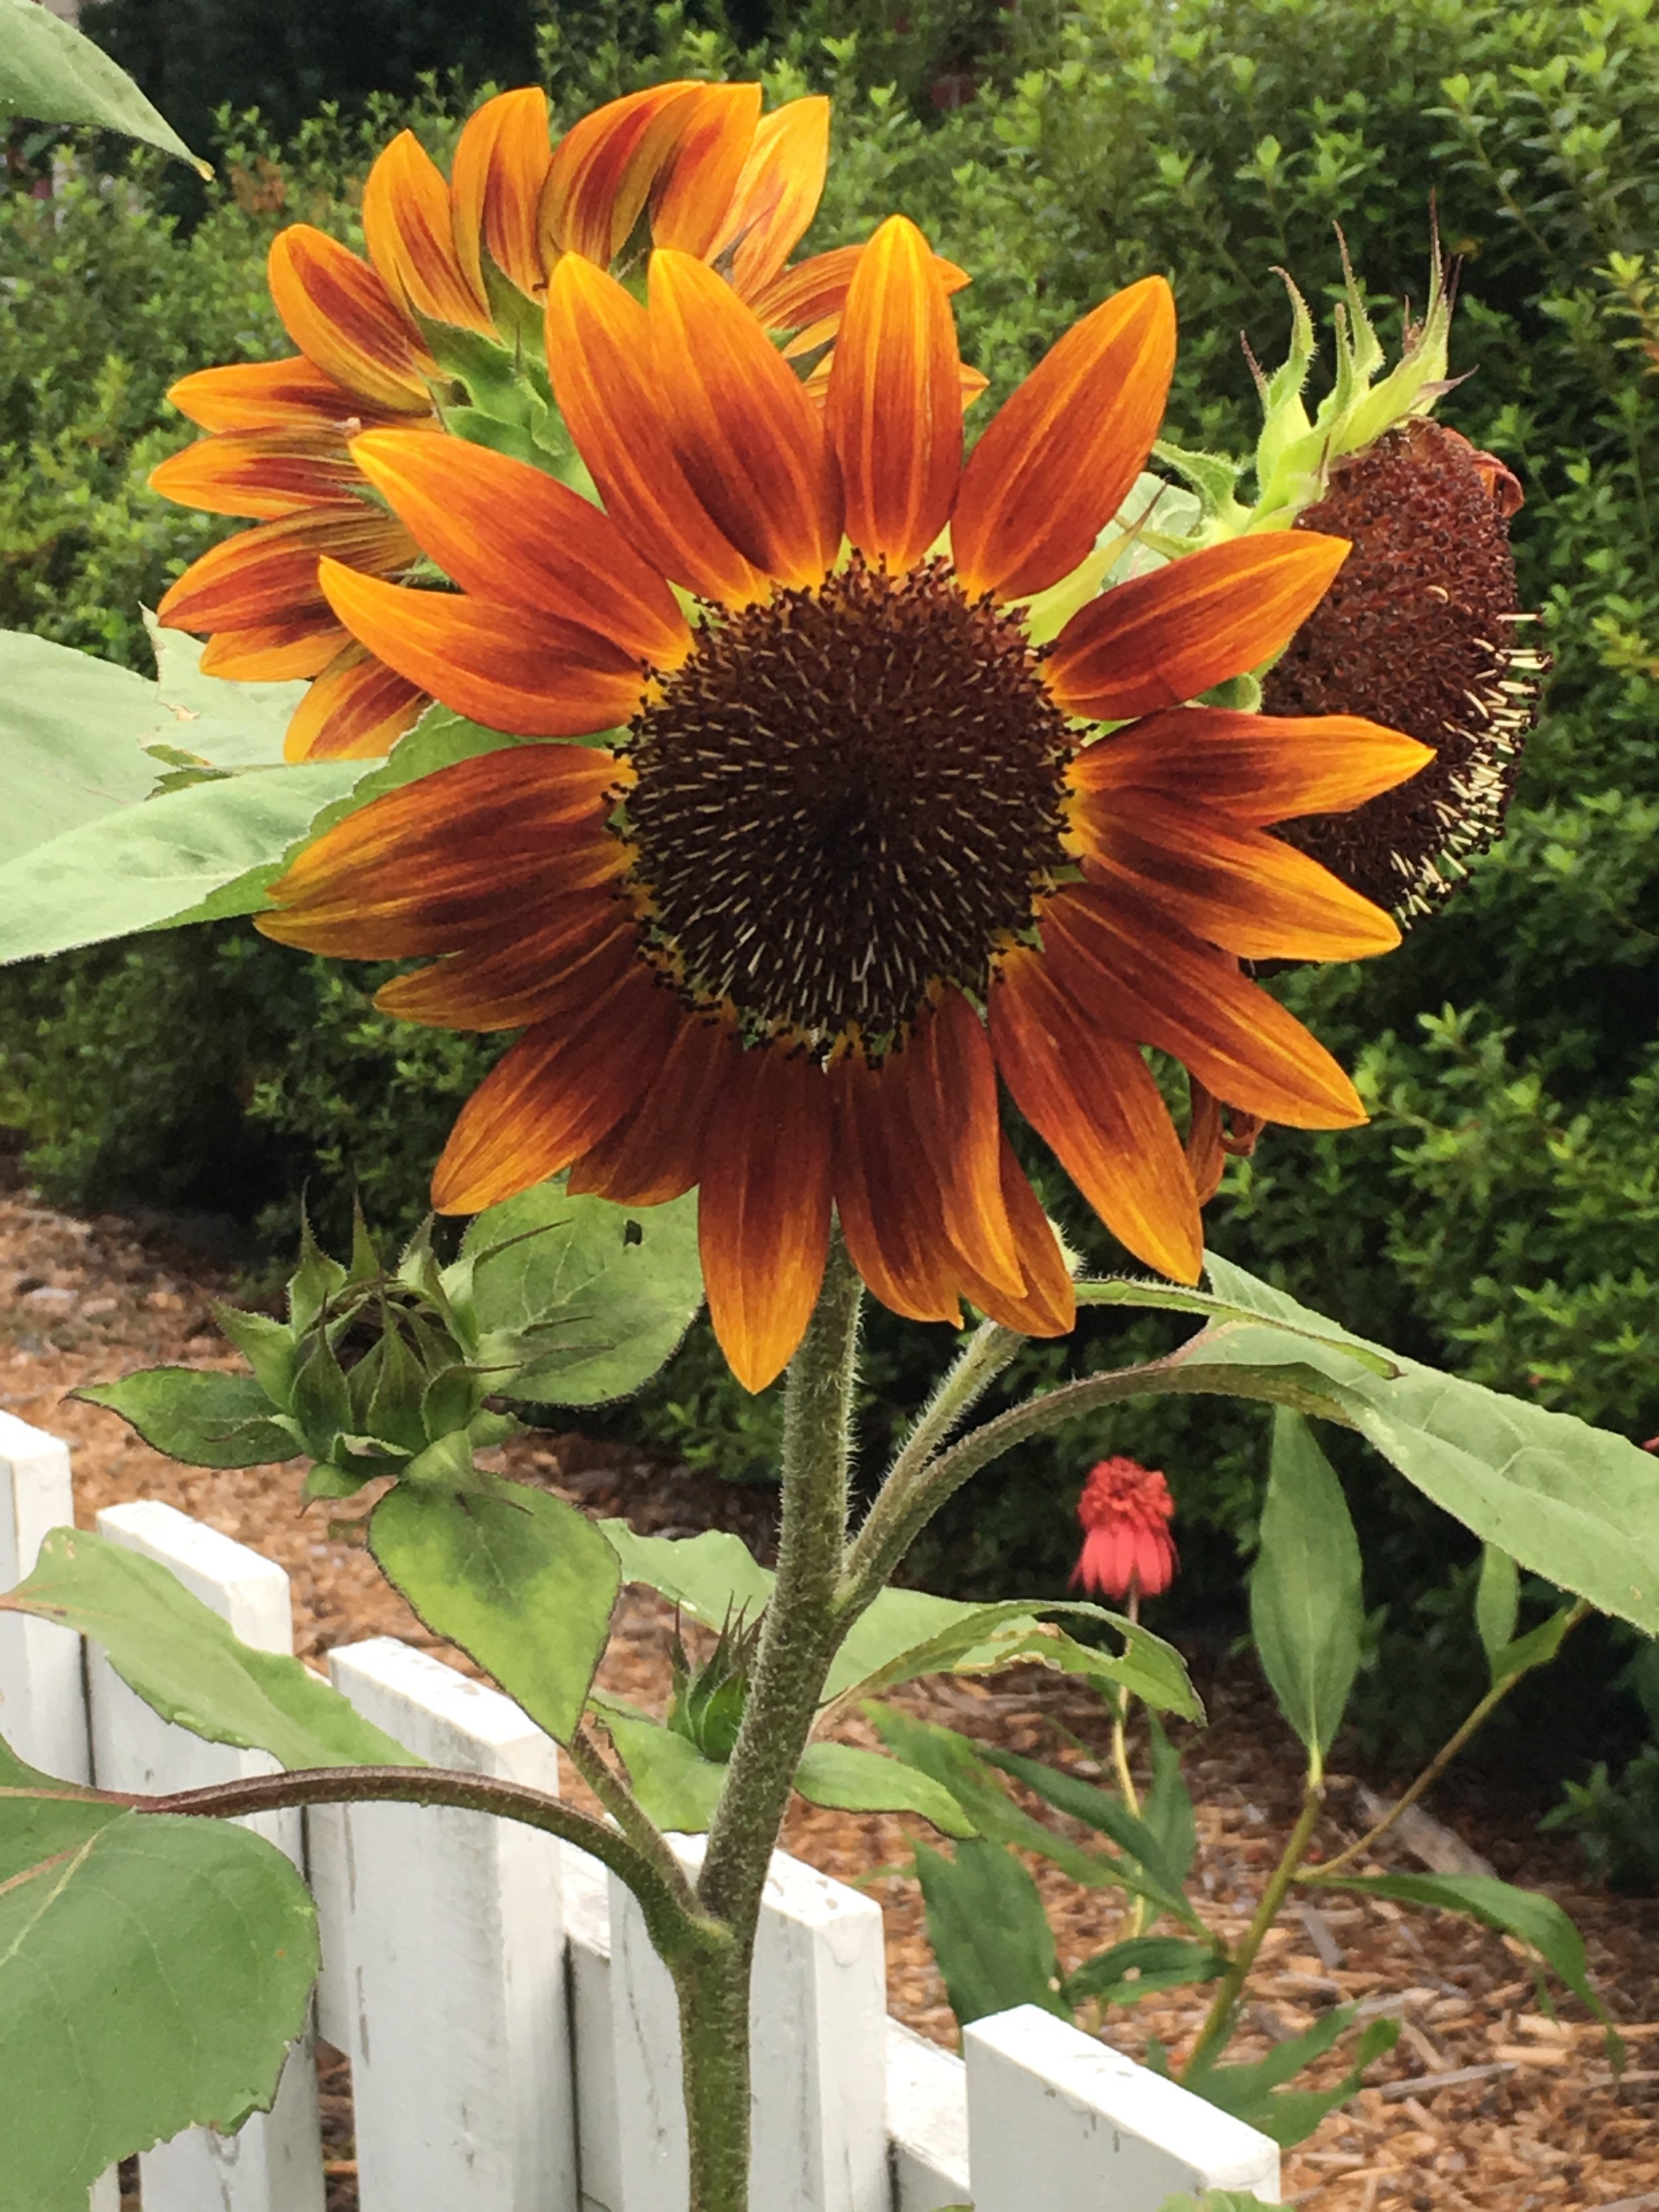 Helianthus annuus and cultivars, sunflowers, against a white picket fence. Honey bees love them and sunflowers need the bees to create more seed.